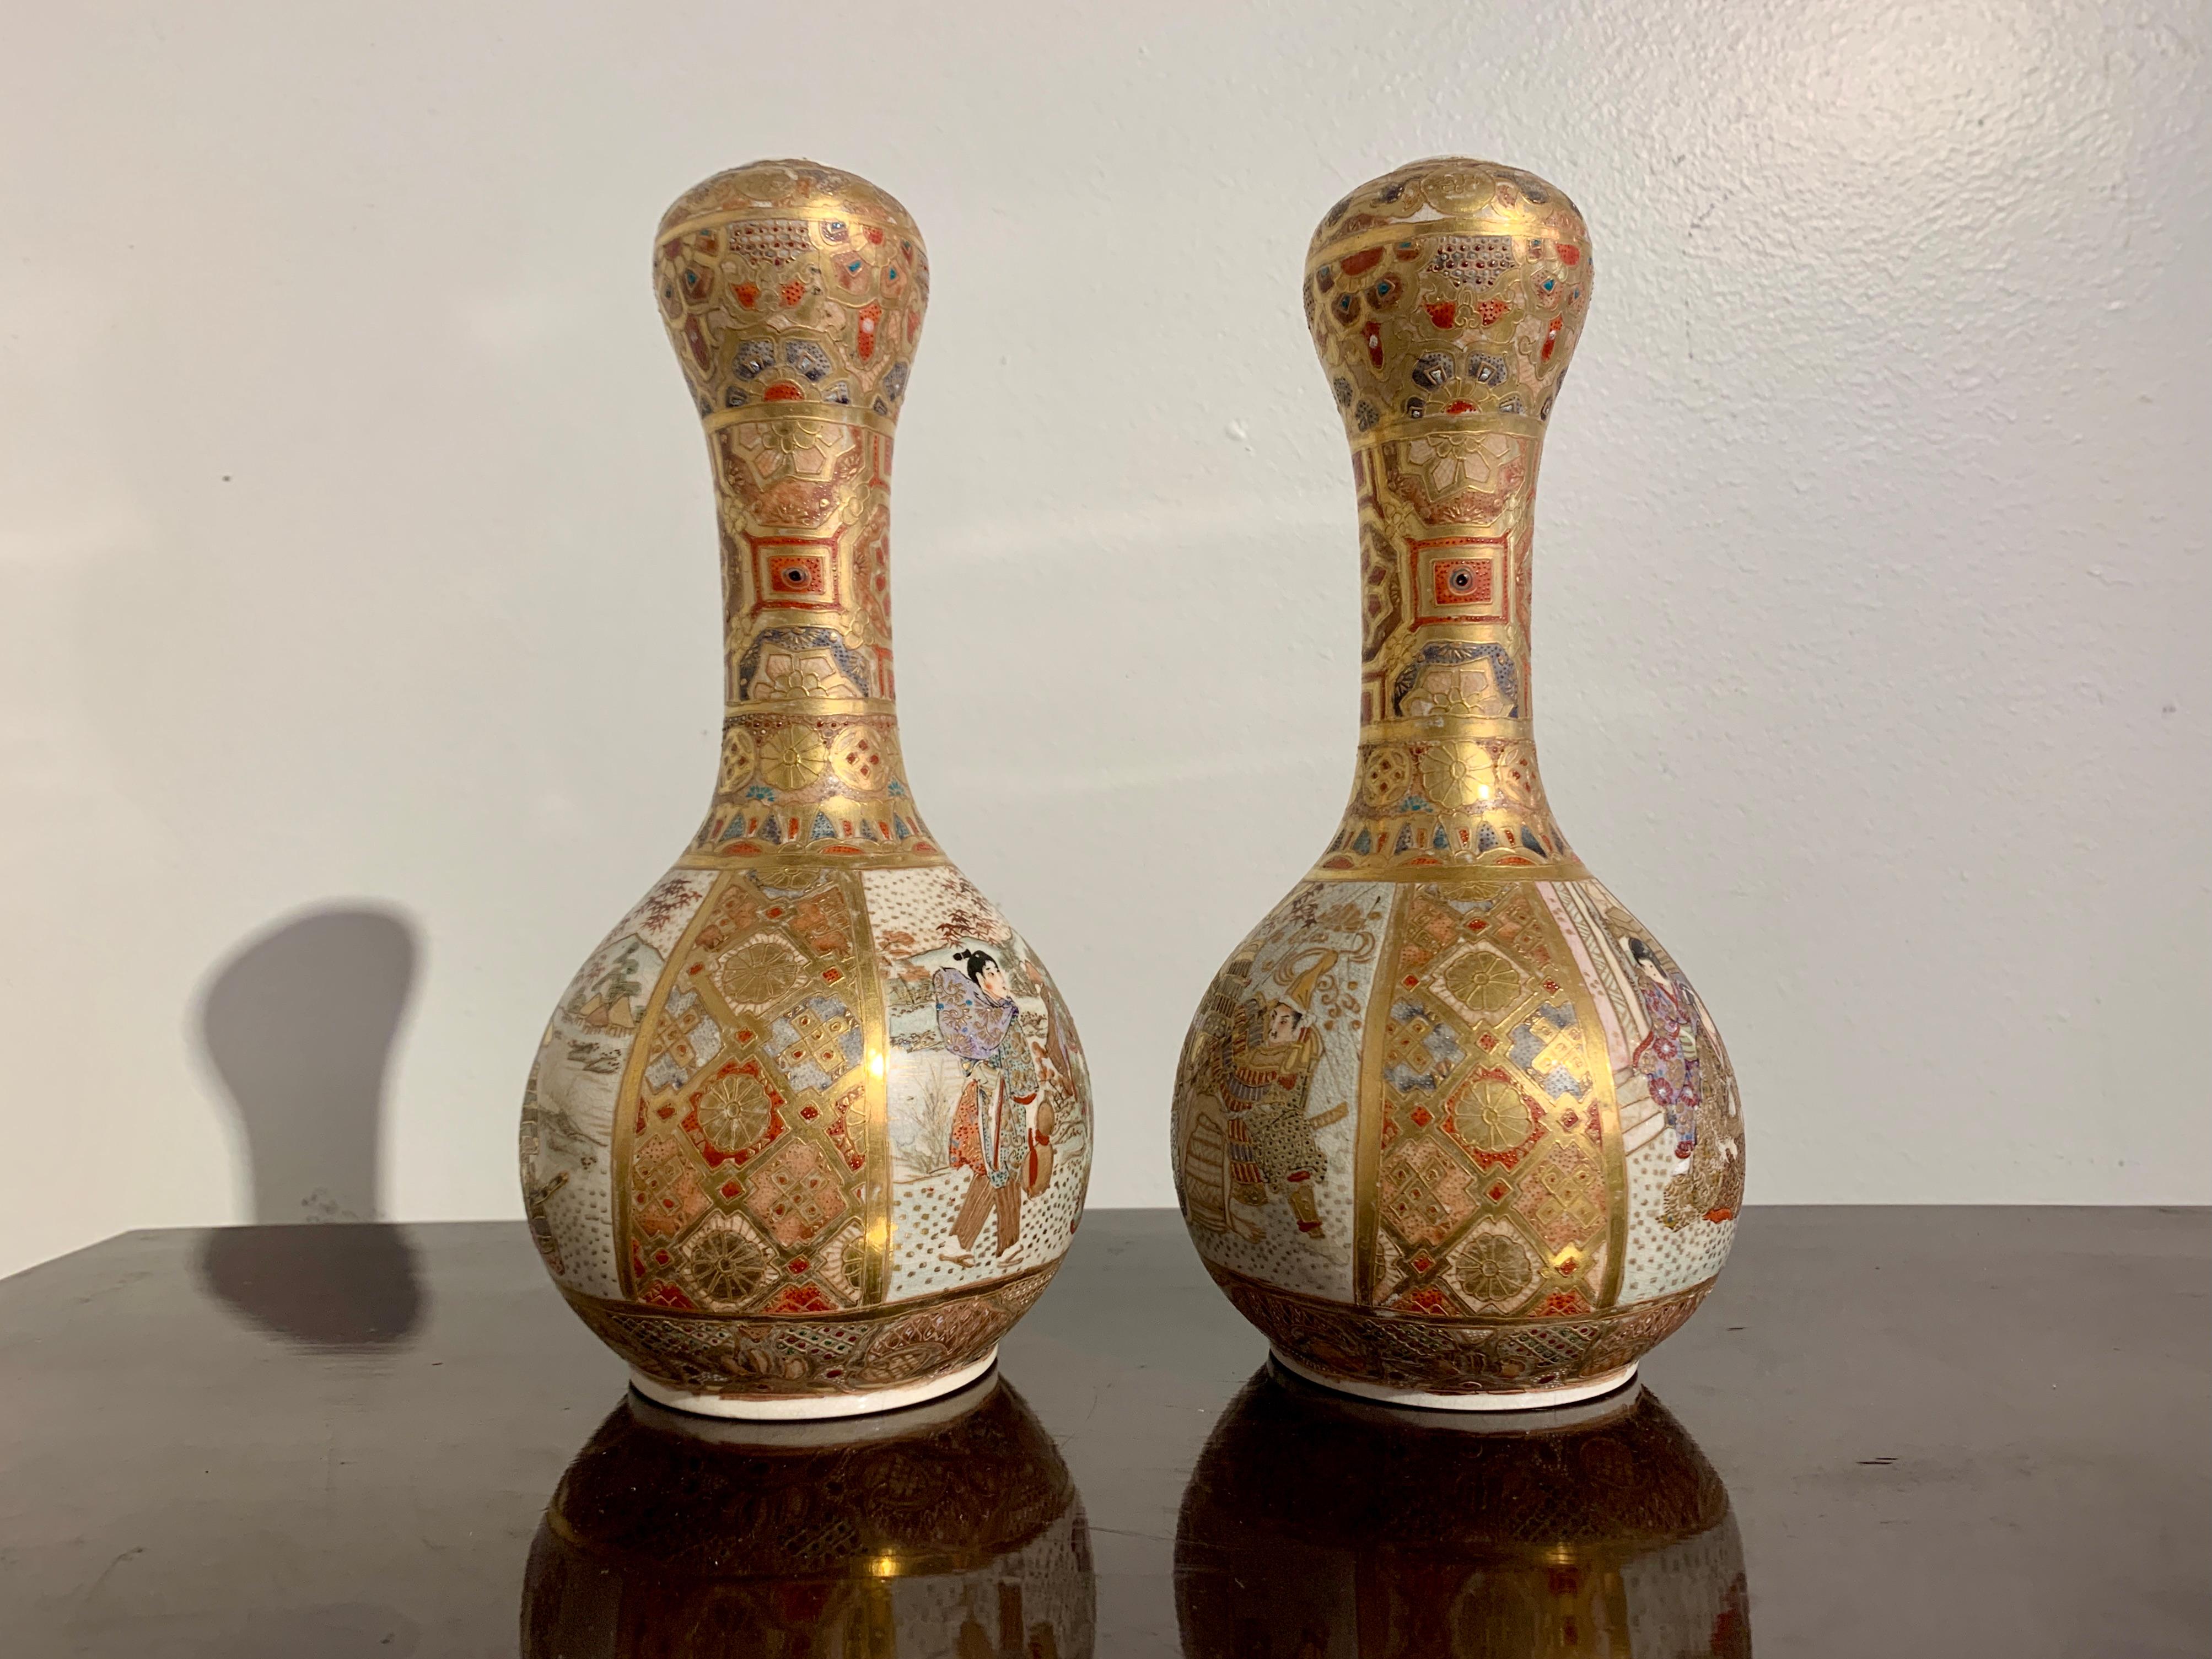 A finely decorated pair of Japanese Satsuma vases with garlic head mouths, Meiji period, early 20th century, Japan.

The pair of Satsuma vases richly decorated with sumptuous gilding and colorful raised enamels. The bodies of globular form with a